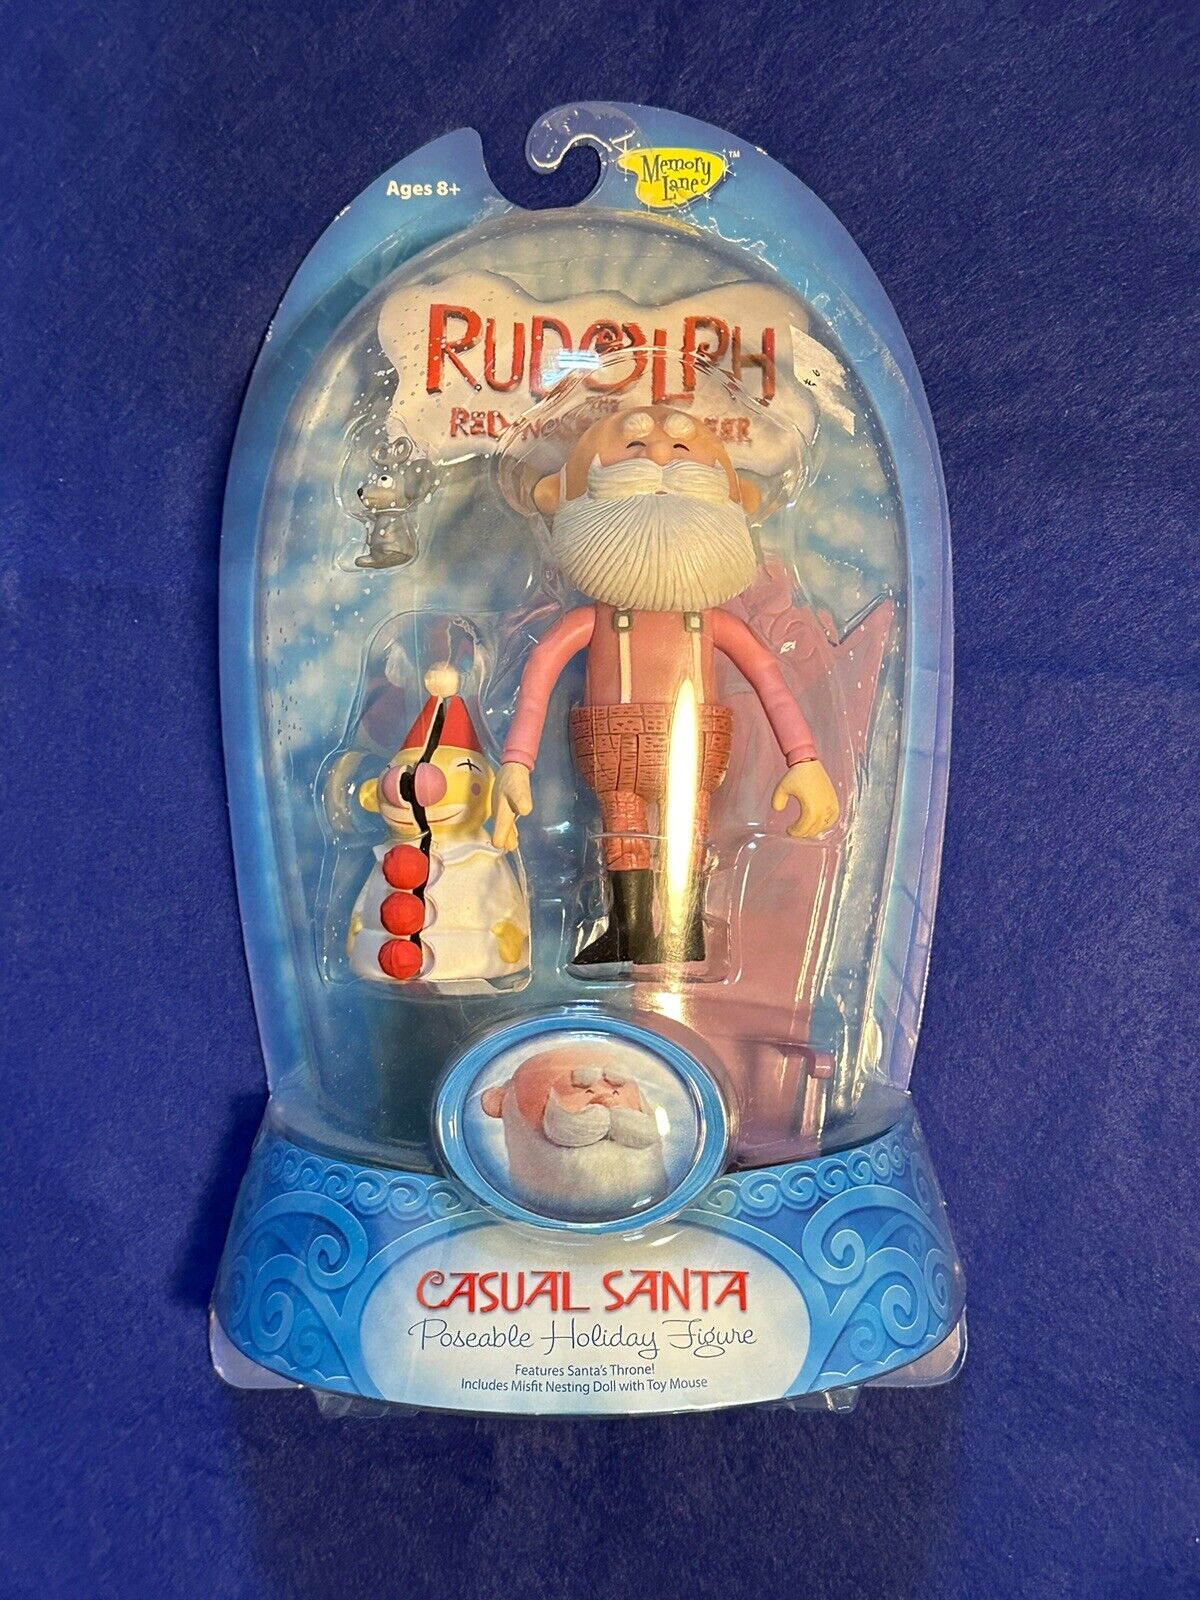 Rudolph The Red Nosed Reindeer-Casual Santa Figure